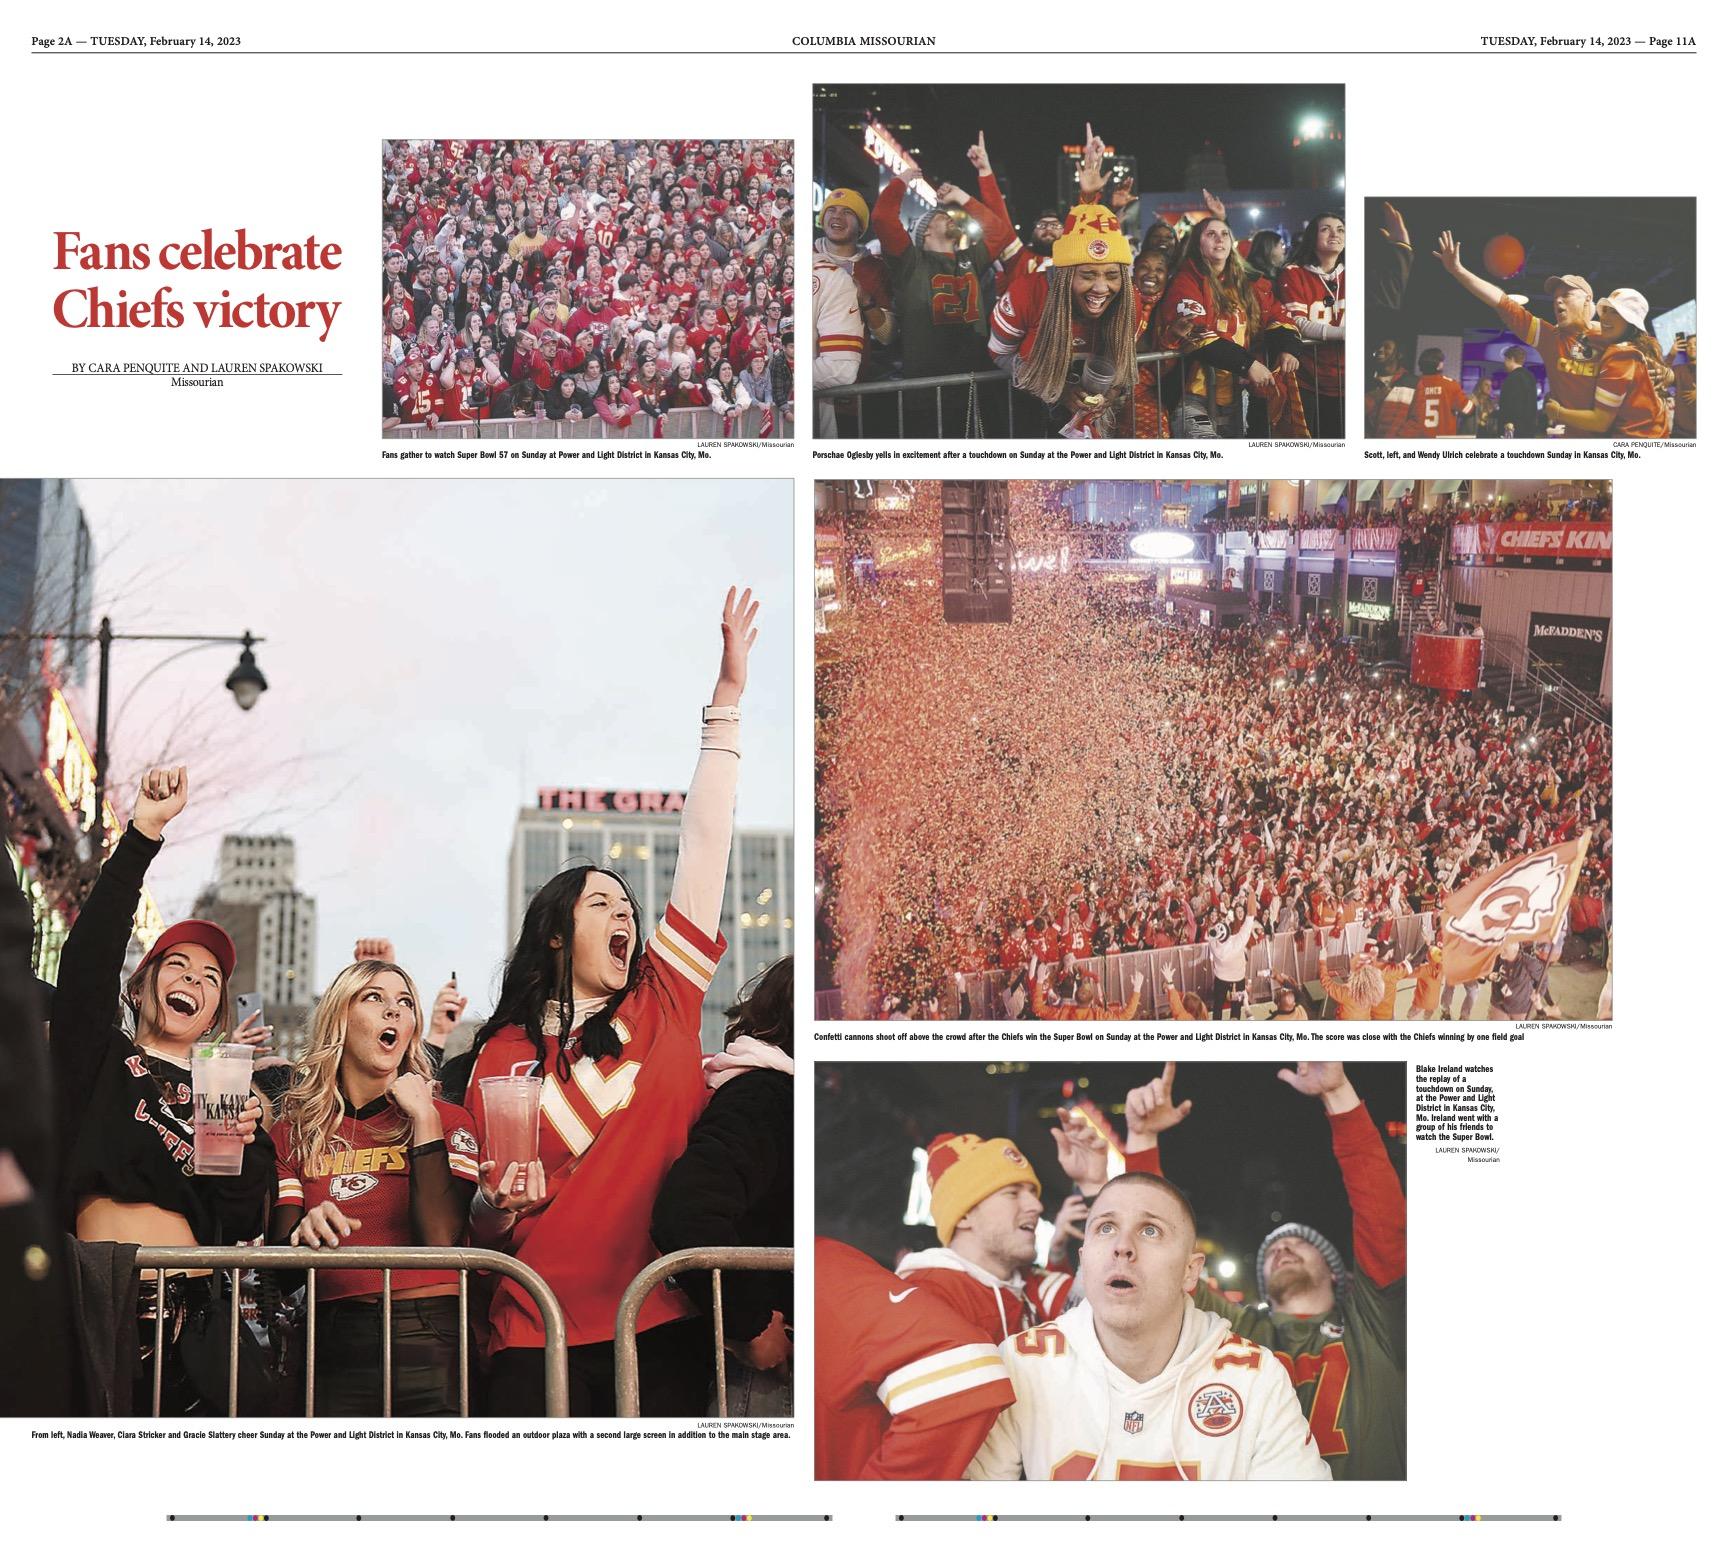 I worked with other editors to select these photos for print as part of our Super Bowl coverage for the Missourian.